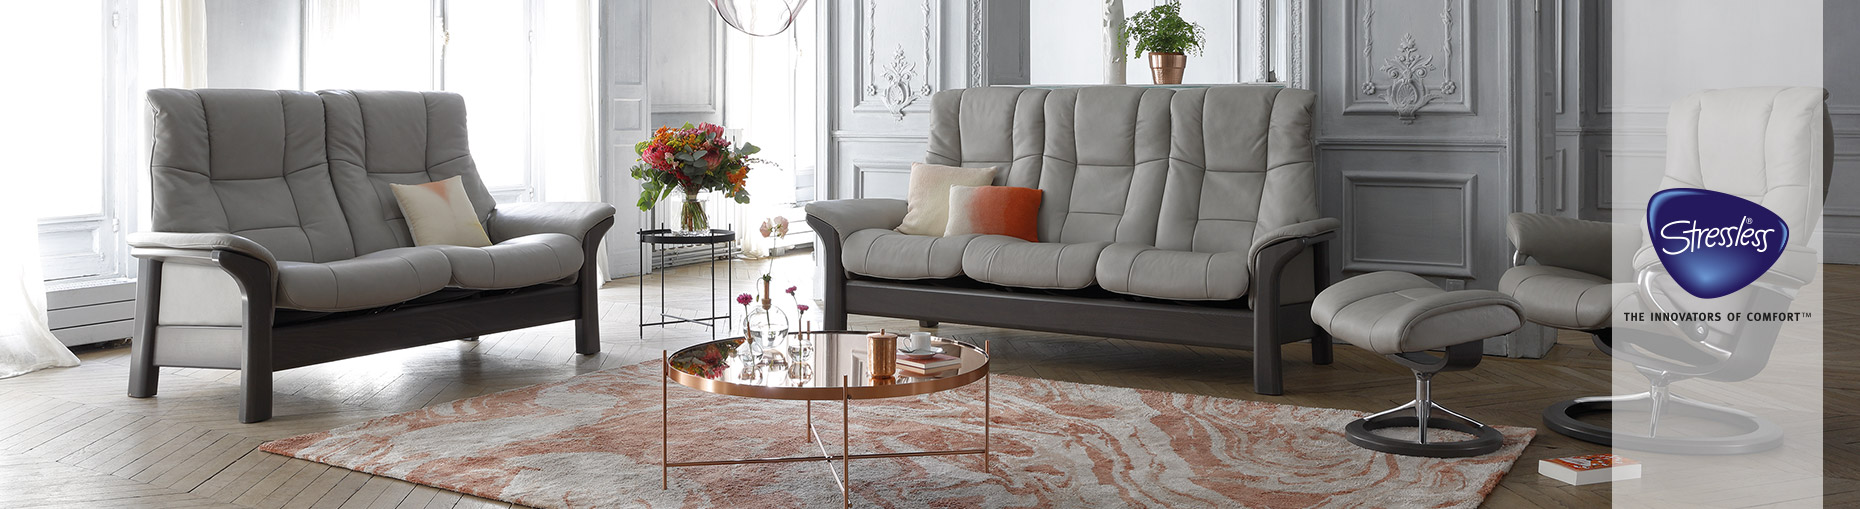 Buckingham Sofa collection by Stressless from Ekornes at Forrest Furnishing